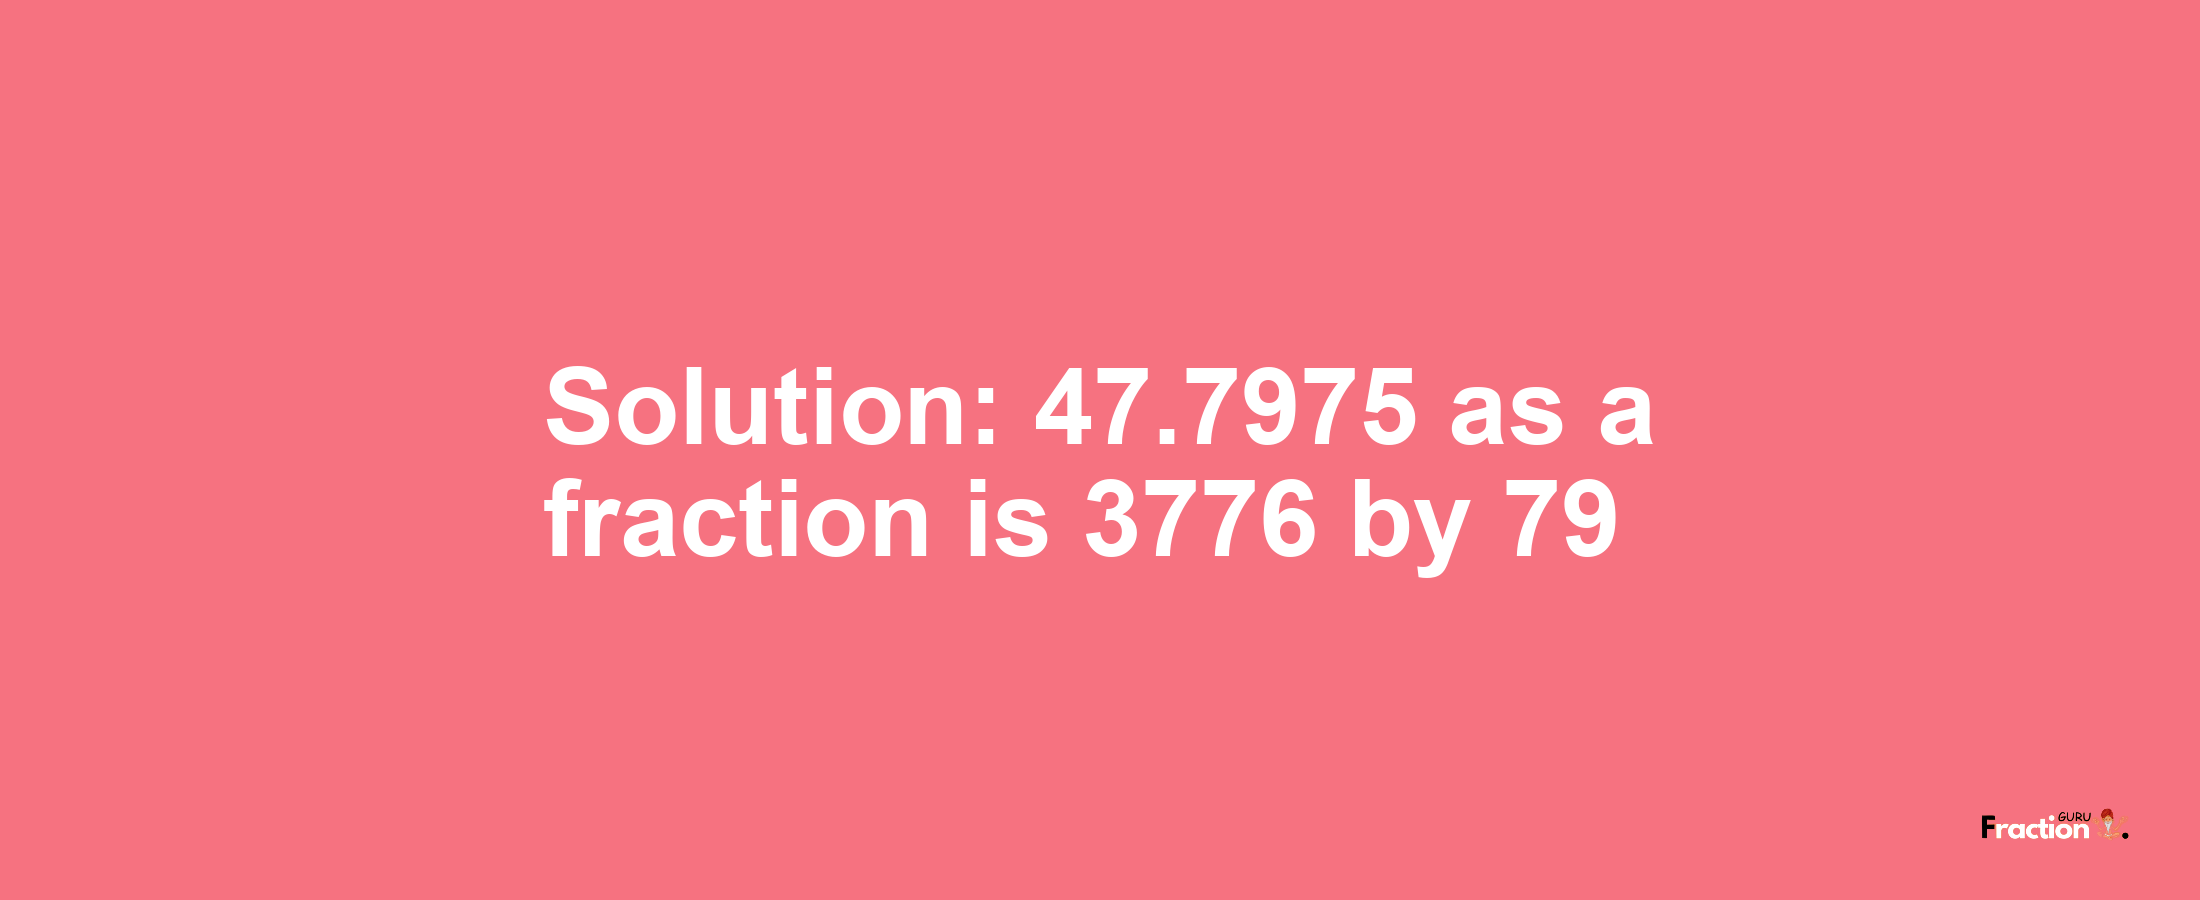 Solution:47.7975 as a fraction is 3776/79